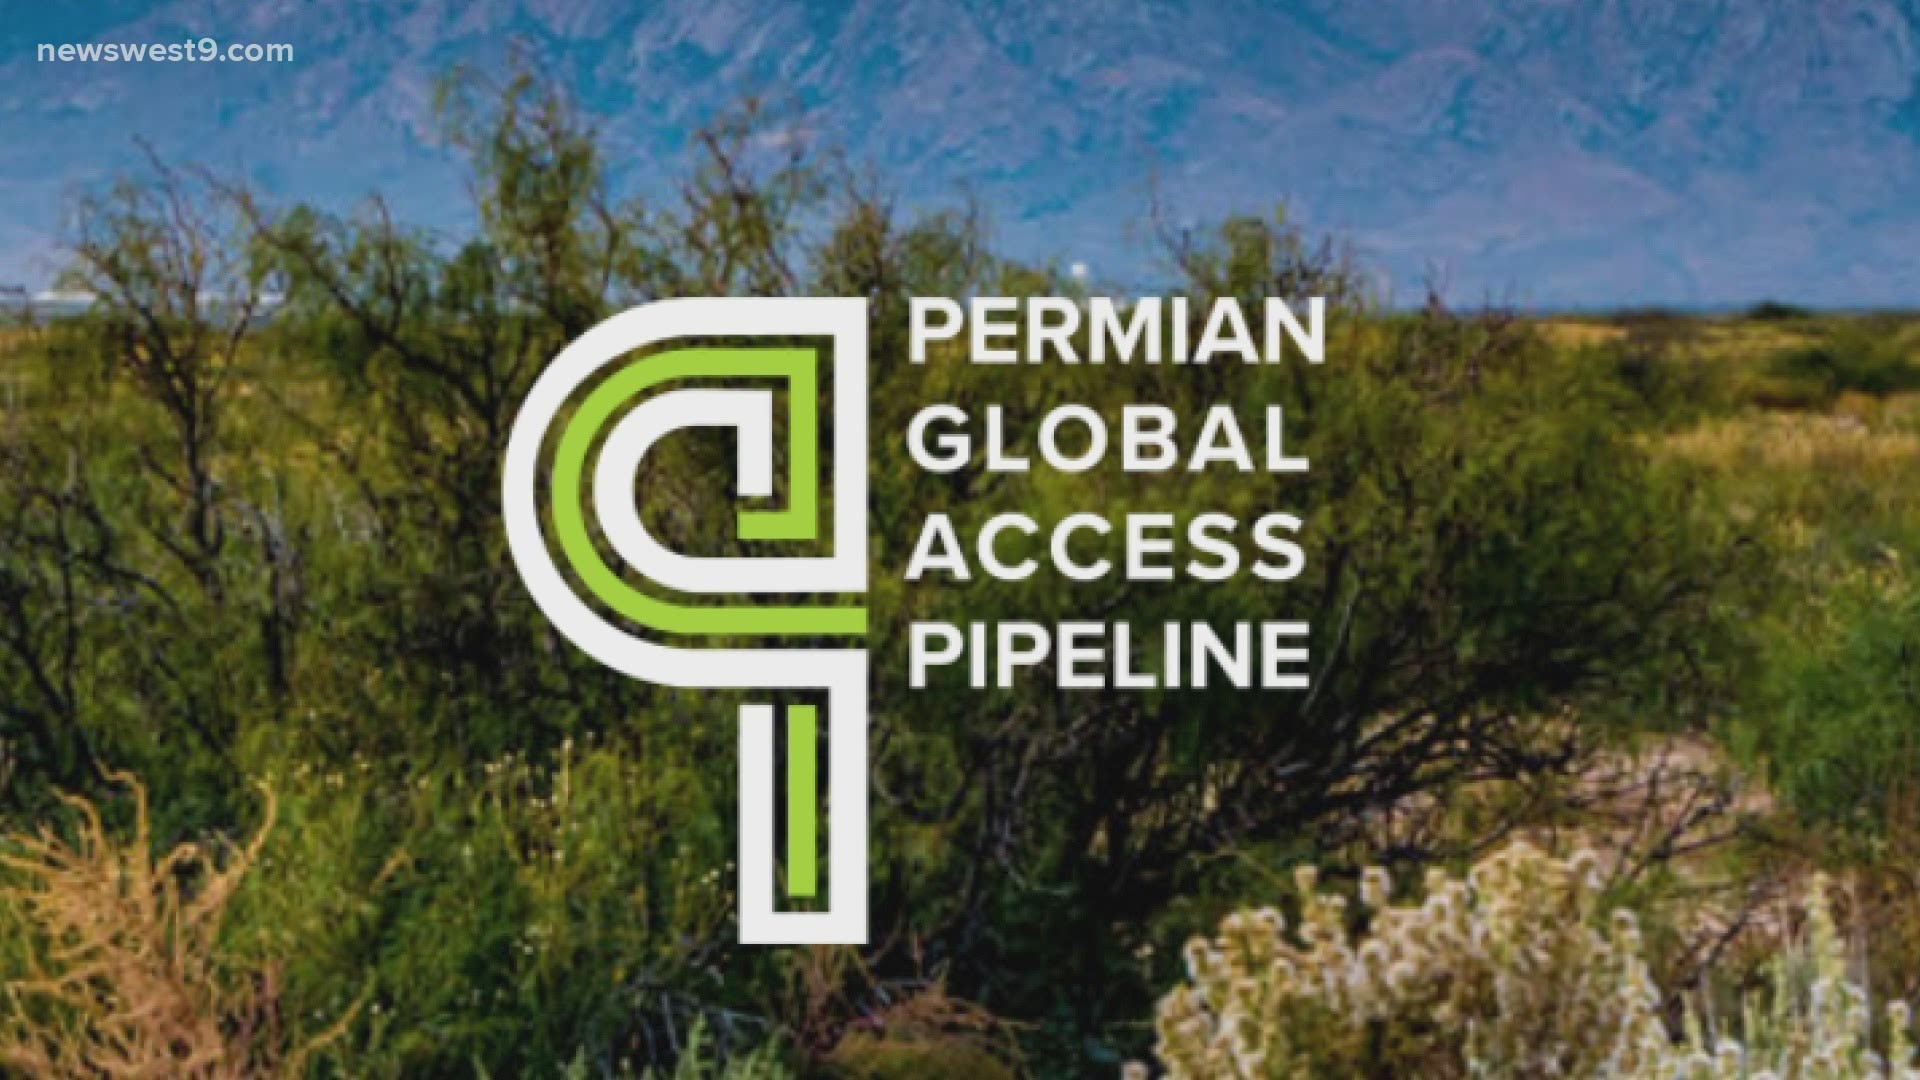 Tellurian withdrew the application to build the pipeline in December, citing the instability of the fossil fuel industry during the global pandemic.